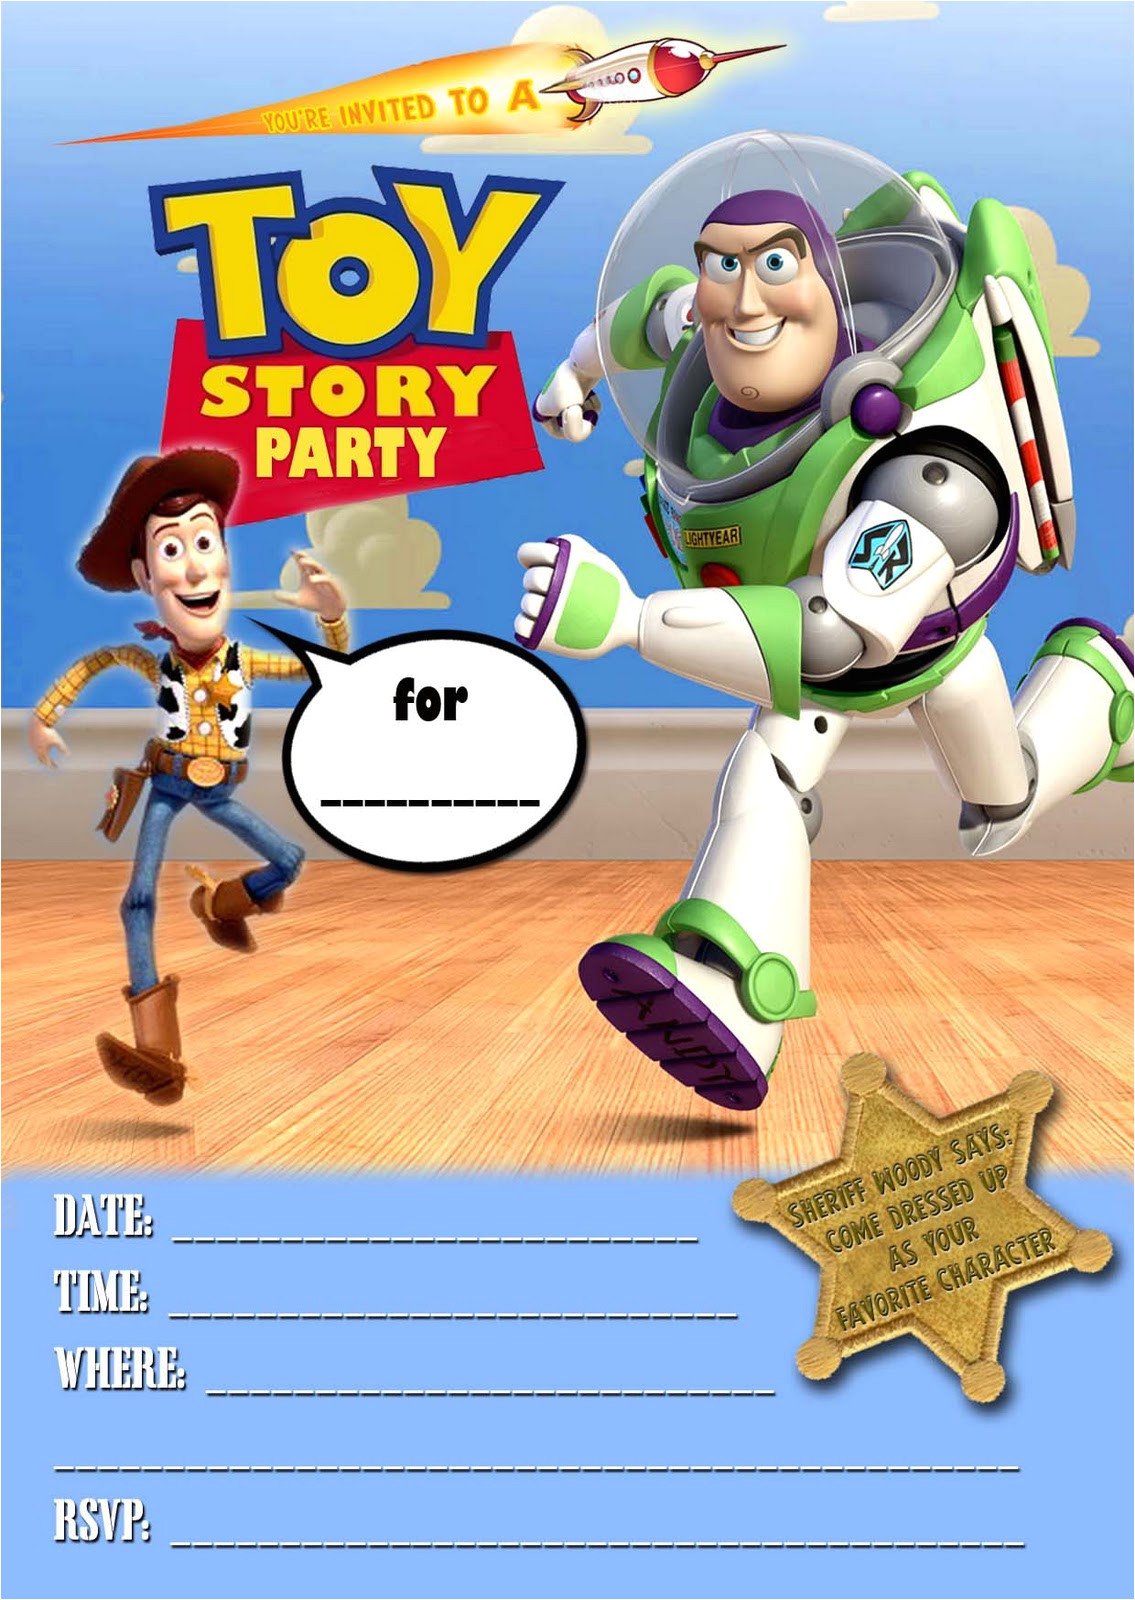 toy story party invitation new m 1